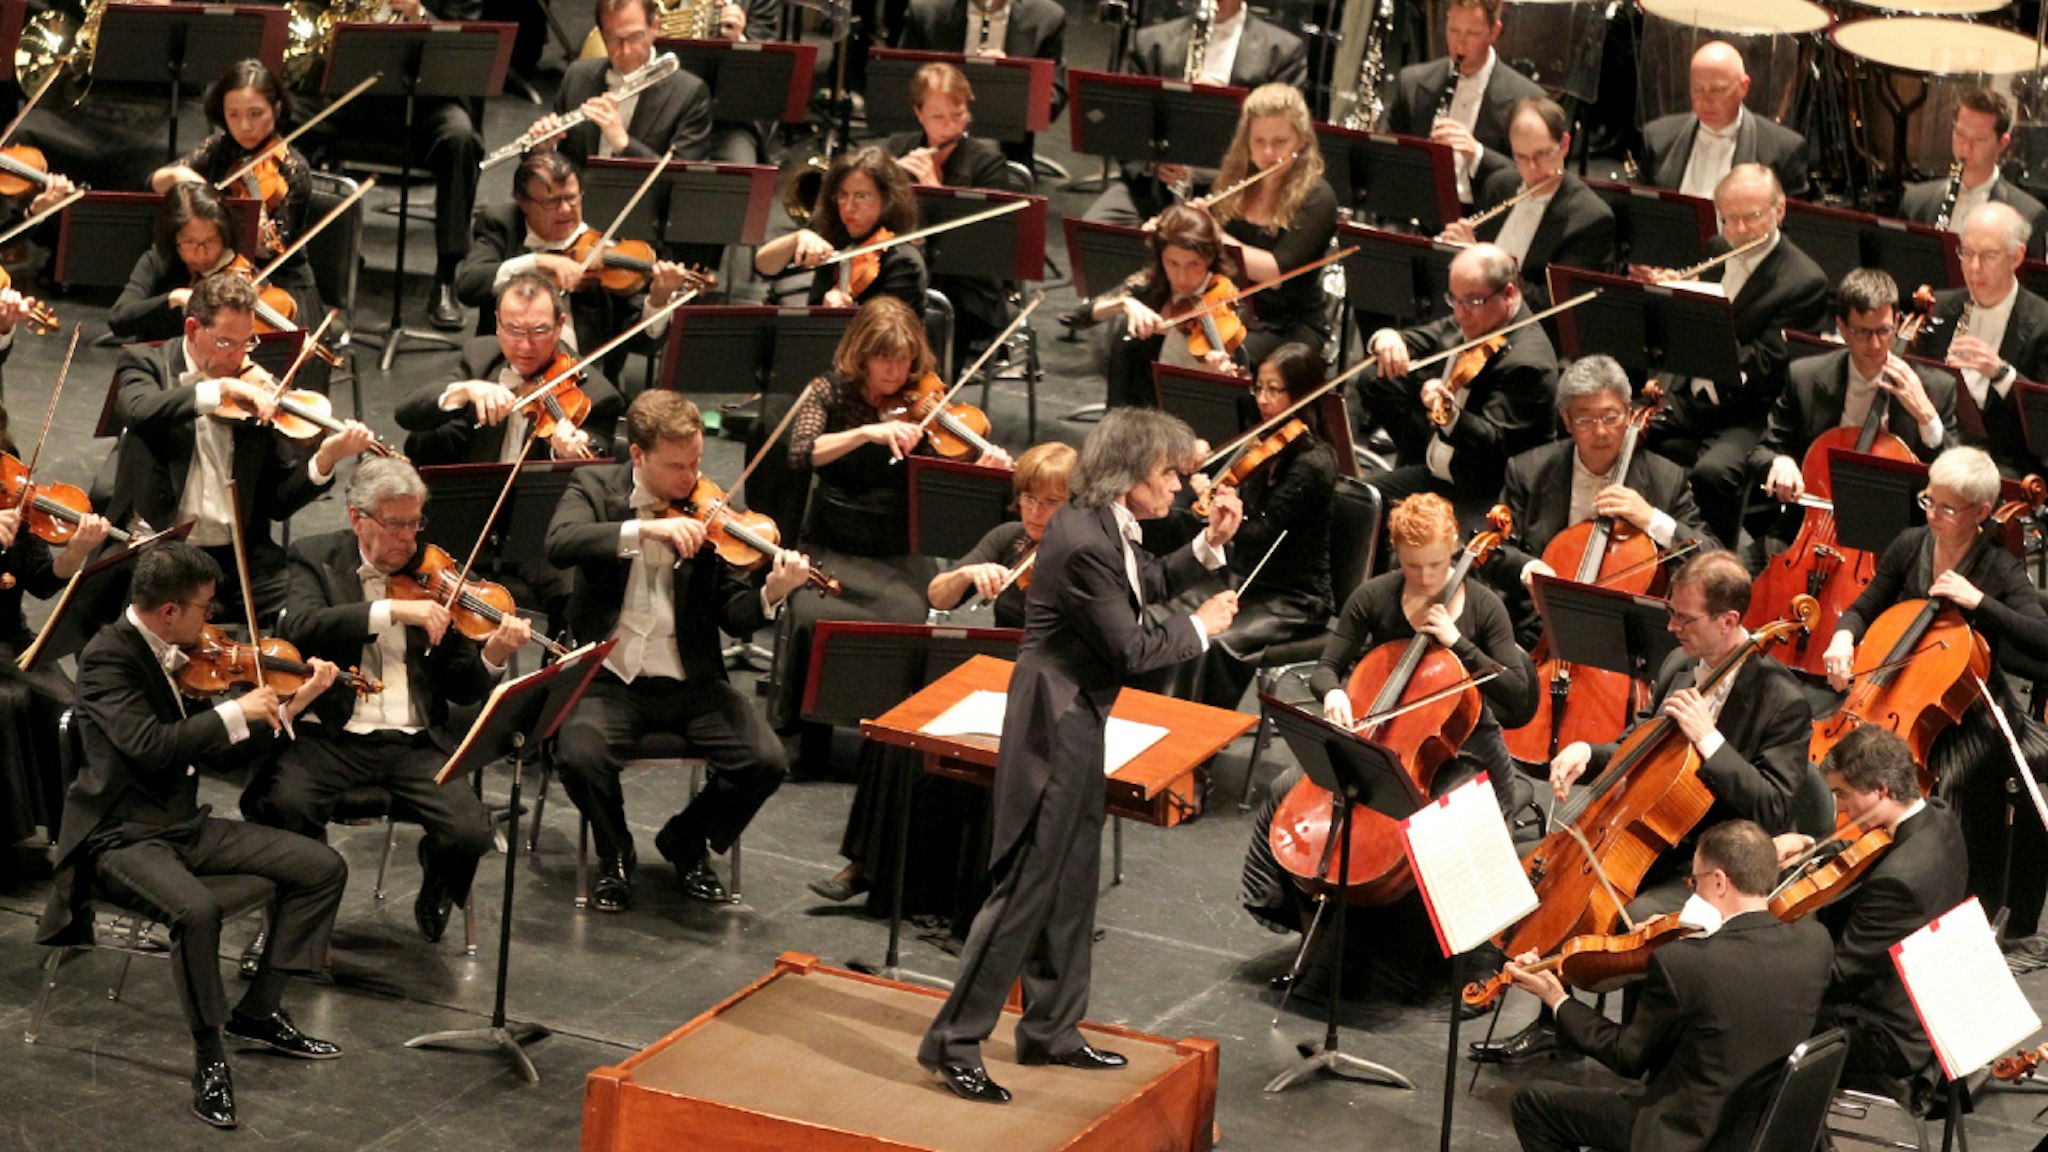 Kent Nagano, music director and conductor, leads the Montreal Symphony Orchestra in a performance at Zellerbach Hall at UC Berkeley in Berkeley, Calif., on Saturday, March 26, 2016.